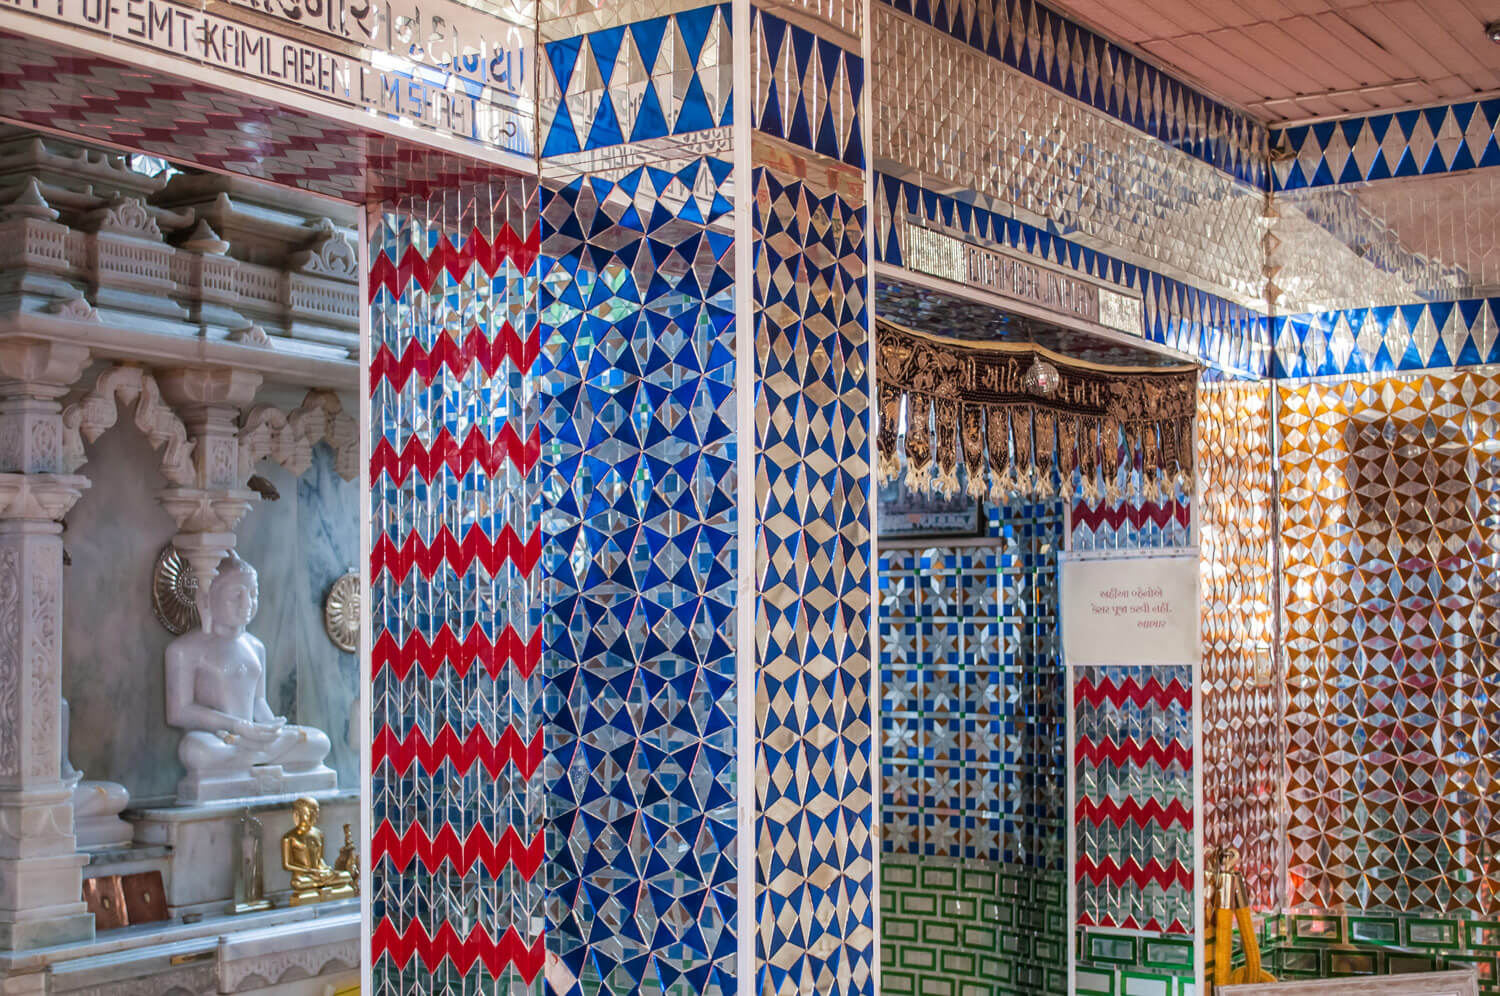 Mirrored tiles in the Digamber Jinalay (an interior temple) -